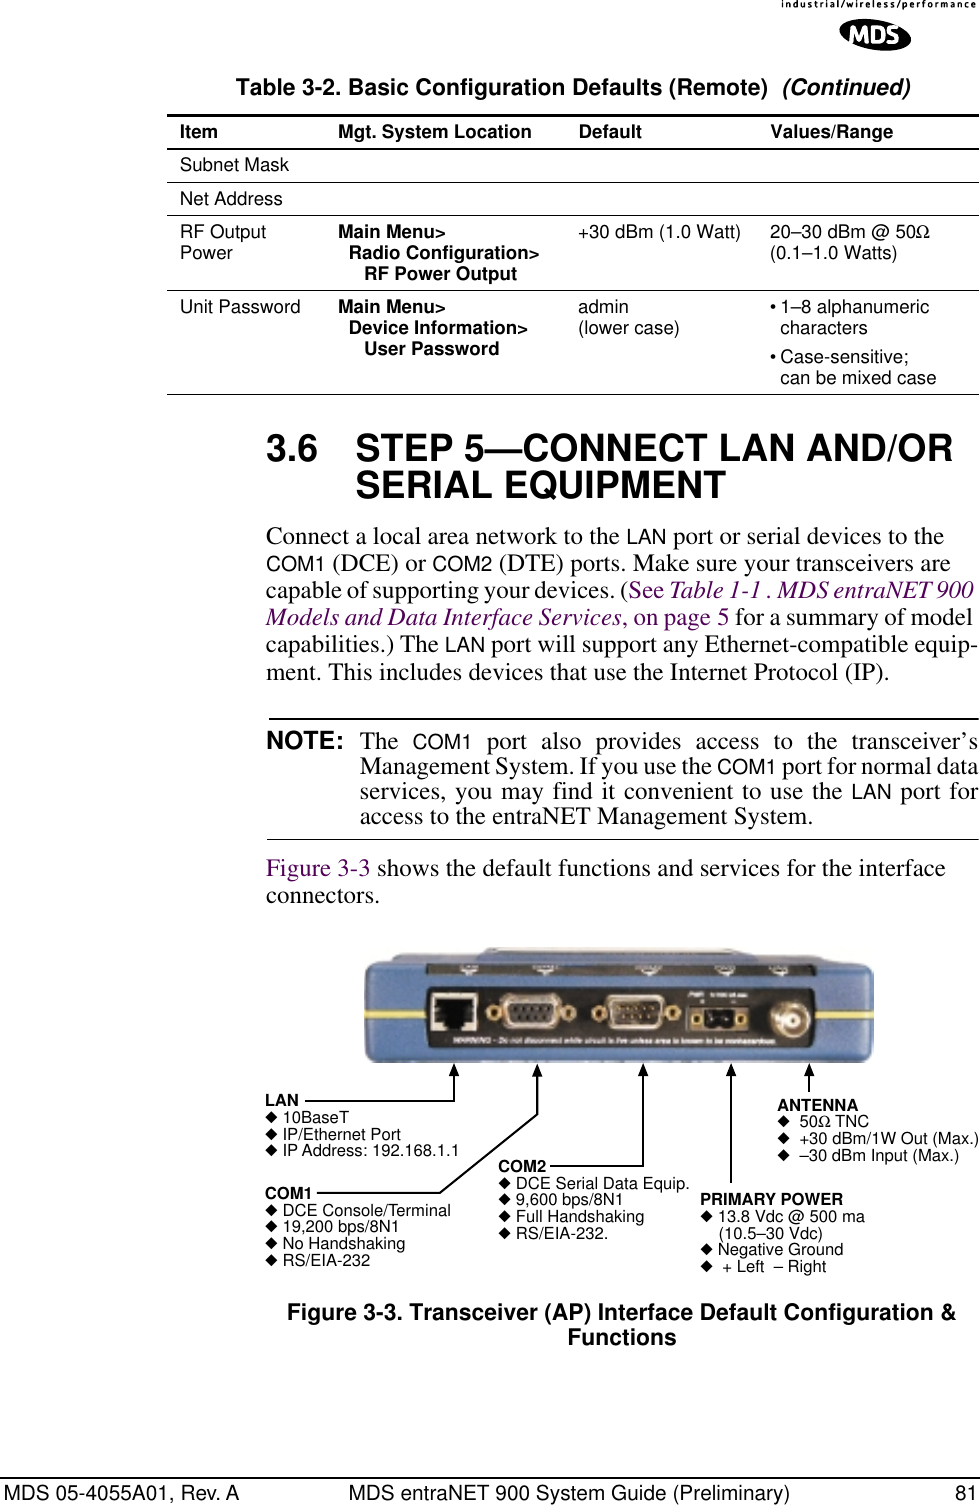 MDS 05-4055A01, Rev. A MDS entraNET 900 System Guide (Preliminary) 813.6 STEP 5—CONNECT LAN AND/OR SERIAL EQUIPMENTConnect a local area network to the LAN port or serial devices to the COM1 (DCE) or COM2 (DTE) ports. Make sure your transceivers are capable of supporting your devices. (See Table 1-1 . MDS entraNET 900 Models and Data Interface Services, on page 5 for a summary of model capabilities.) The LAN port will support any Ethernet-compatible equip-ment. This includes devices that use the Internet Protocol (IP).NOTE: The  COM1 port also provides access to the transceiver’sManagement System. If you use the COM1 port for normal dataservices, you may find it convenient to use the LAN port foraccess to the entraNET Management System.Figure 3-3 shows the default functions and services for the interface connectors.Invisible place holderFigure 3-3. Transceiver (AP) Interface Default Configuration &amp; FunctionsSubnet MaskNet AddressRF Output Power Main Menu&gt;  Radio Configuration&gt;     RF Power Output+30 dBm (1.0 Watt) 20–30 dBm @ 50Ω (0.1–1.0 Watts)Unit Password Main Menu&gt;  Device Information&gt;     User Passwordadmin (lower case) •1–8 alphanumeric characters •Case-sensitive; can be mixed caseTable 3-2. Basic Configuration Defaults (Remote)  (Continued)Item Mgt. System Location Default Values/RangeCOM2◆ DCE Serial Data Equip.◆ 9,600 bps/8N1◆ Full Handshaking◆ RS/EIA-232.LAN◆ 10BaseT◆ IP/Ethernet Port◆IP Address: 192.168.1.1COM1◆DCE Console/Terminal◆ 19,200 bps/8N1◆No Handshaking◆ RS/EIA-232PRIMARY POWER◆ 13.8 Vdc @ 500 ma (10.5–30 Vdc)◆ Negative Ground◆  + Left  – RightANTENNA◆  50Ω TNC◆  +30 dBm/1W Out (Max.)◆  –30 dBm Input (Max.)